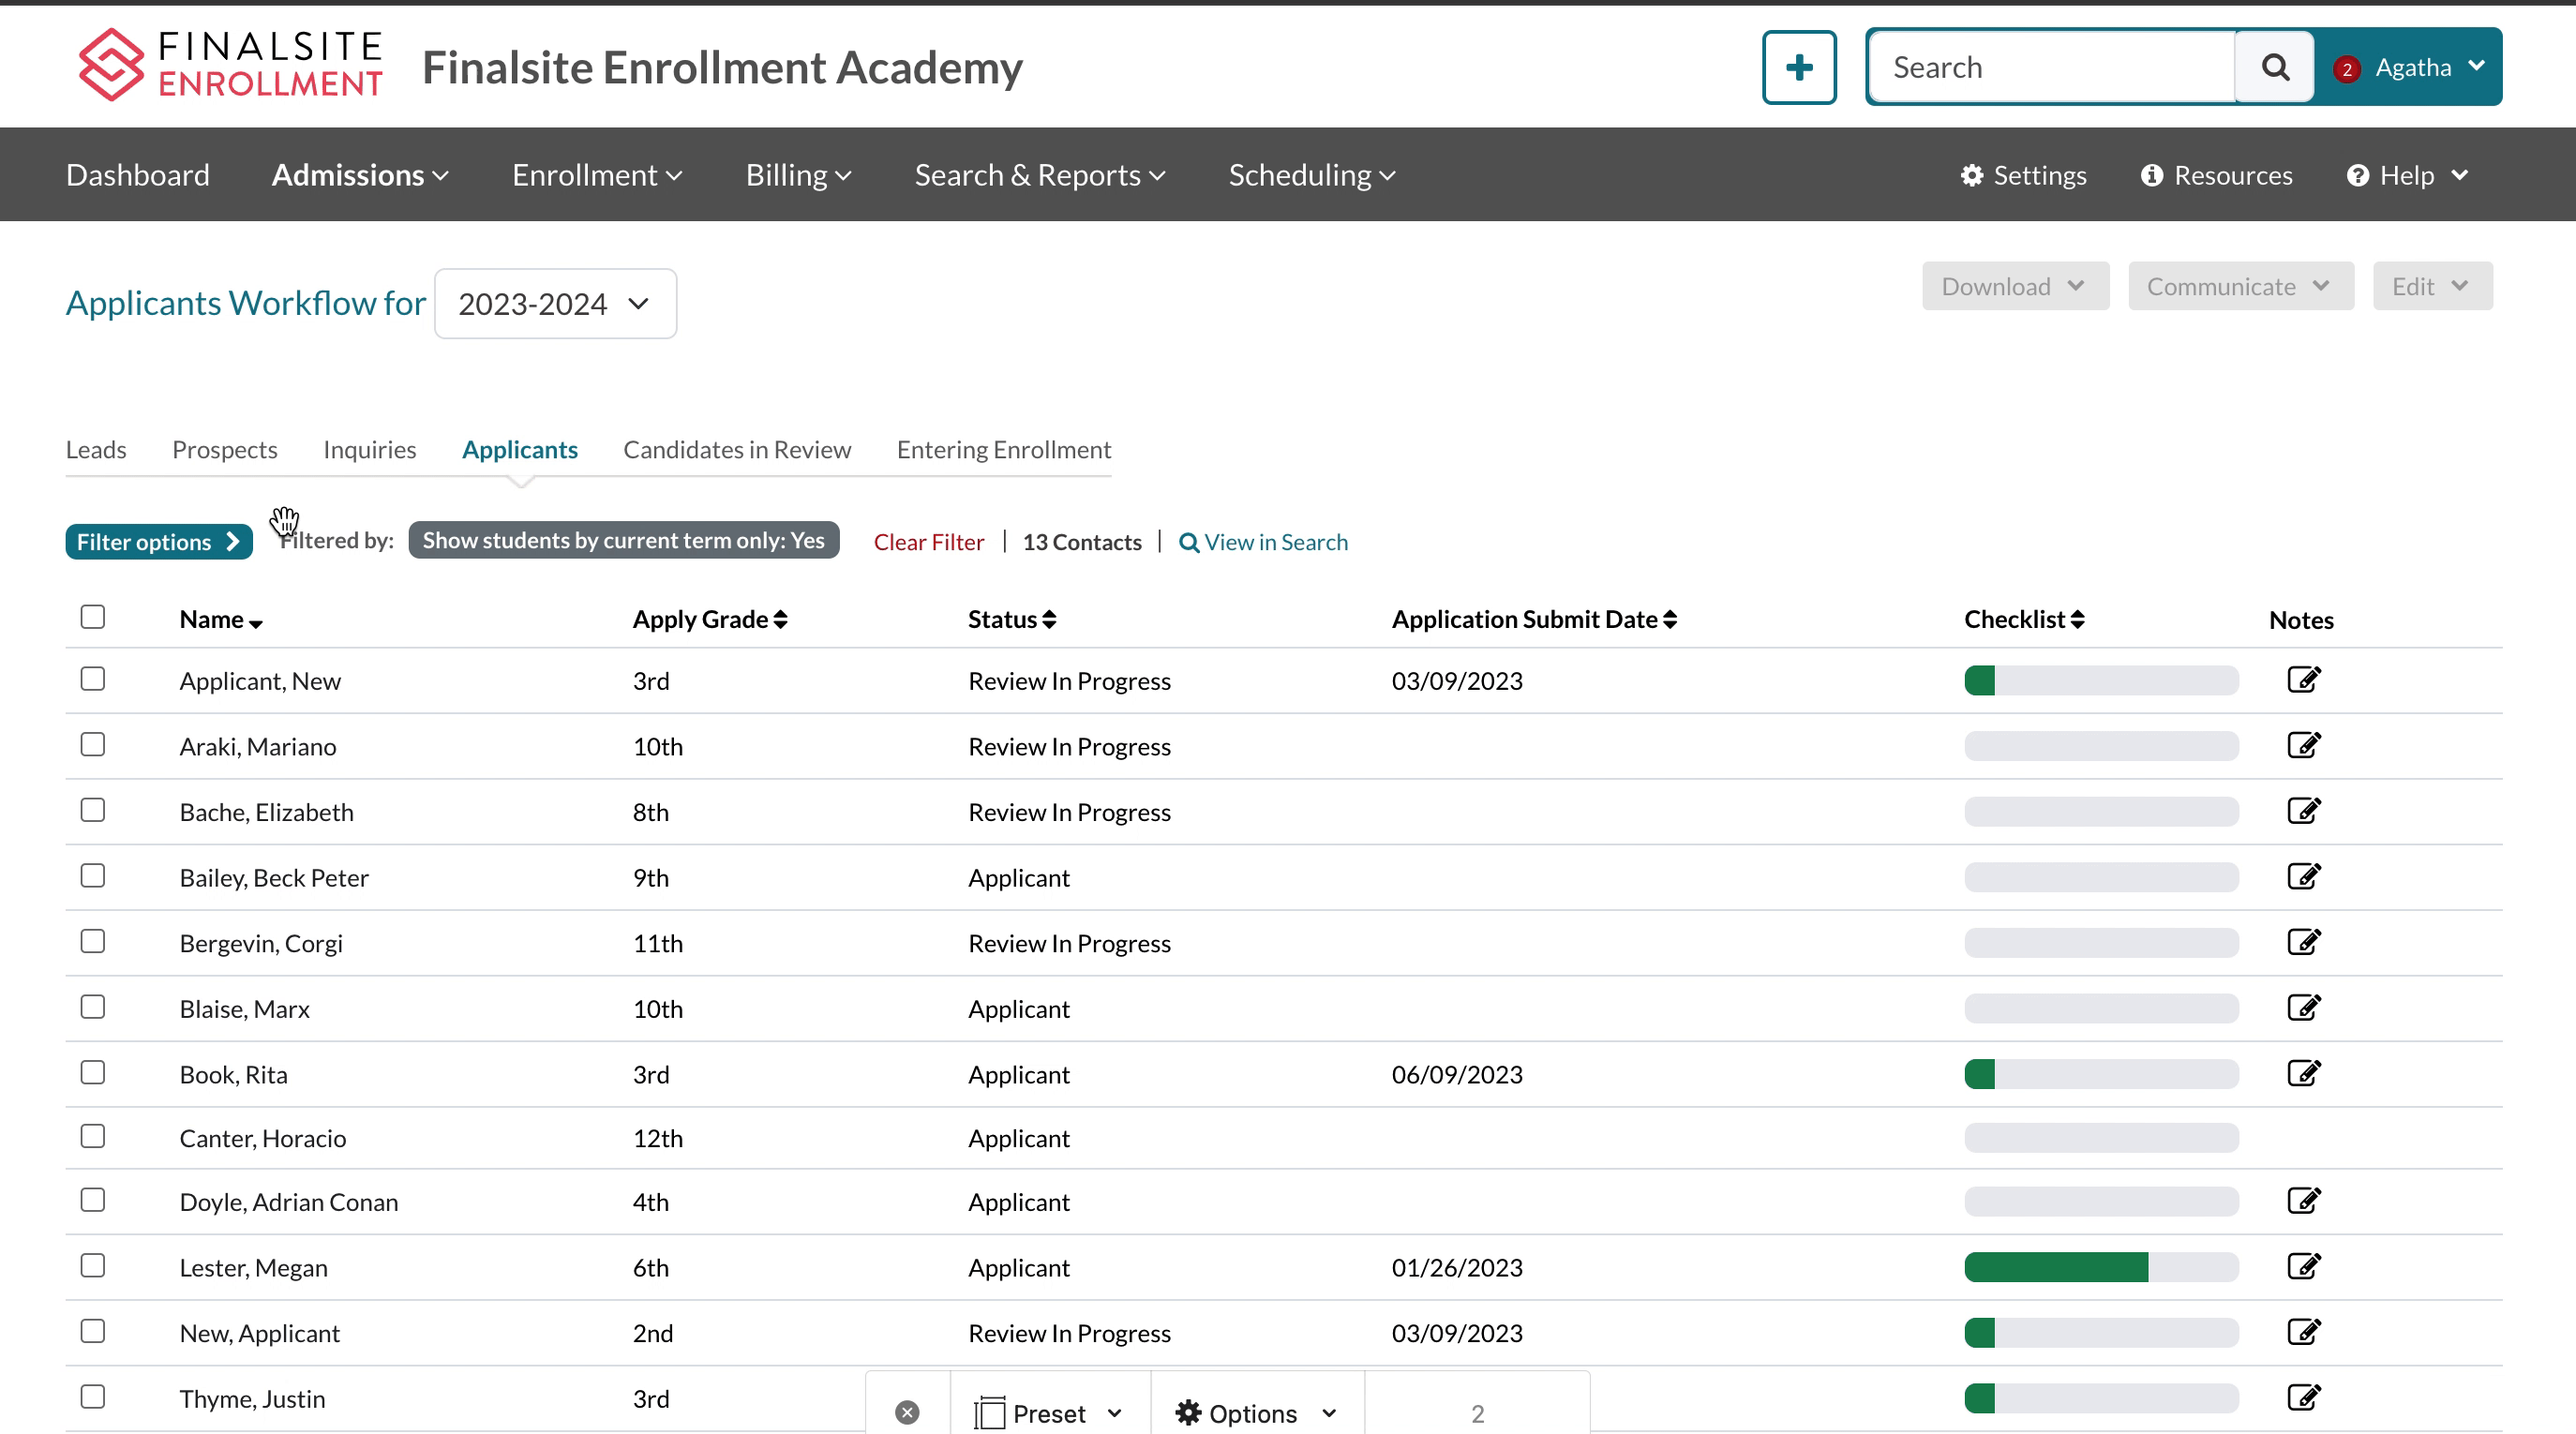 GIF of using the filter options on the Applicants Workflow page